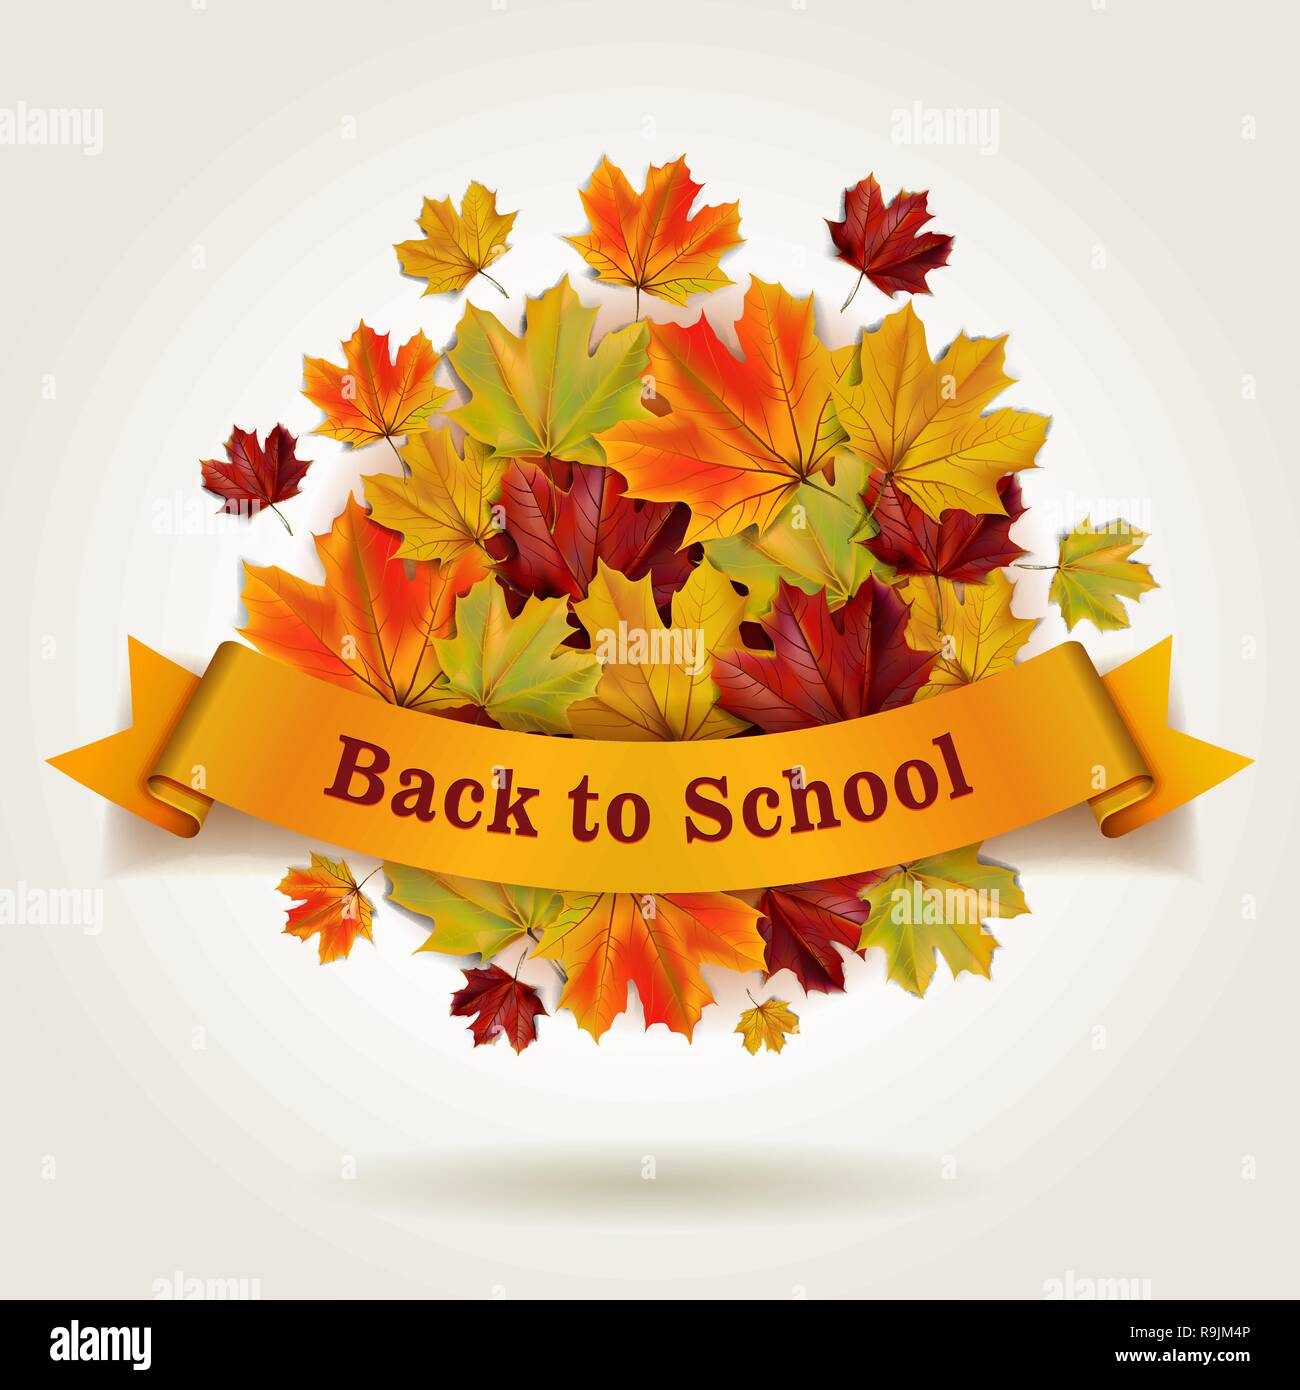 Back to school vector illustration with banner and colorful autumn maple leaves Stock Vector